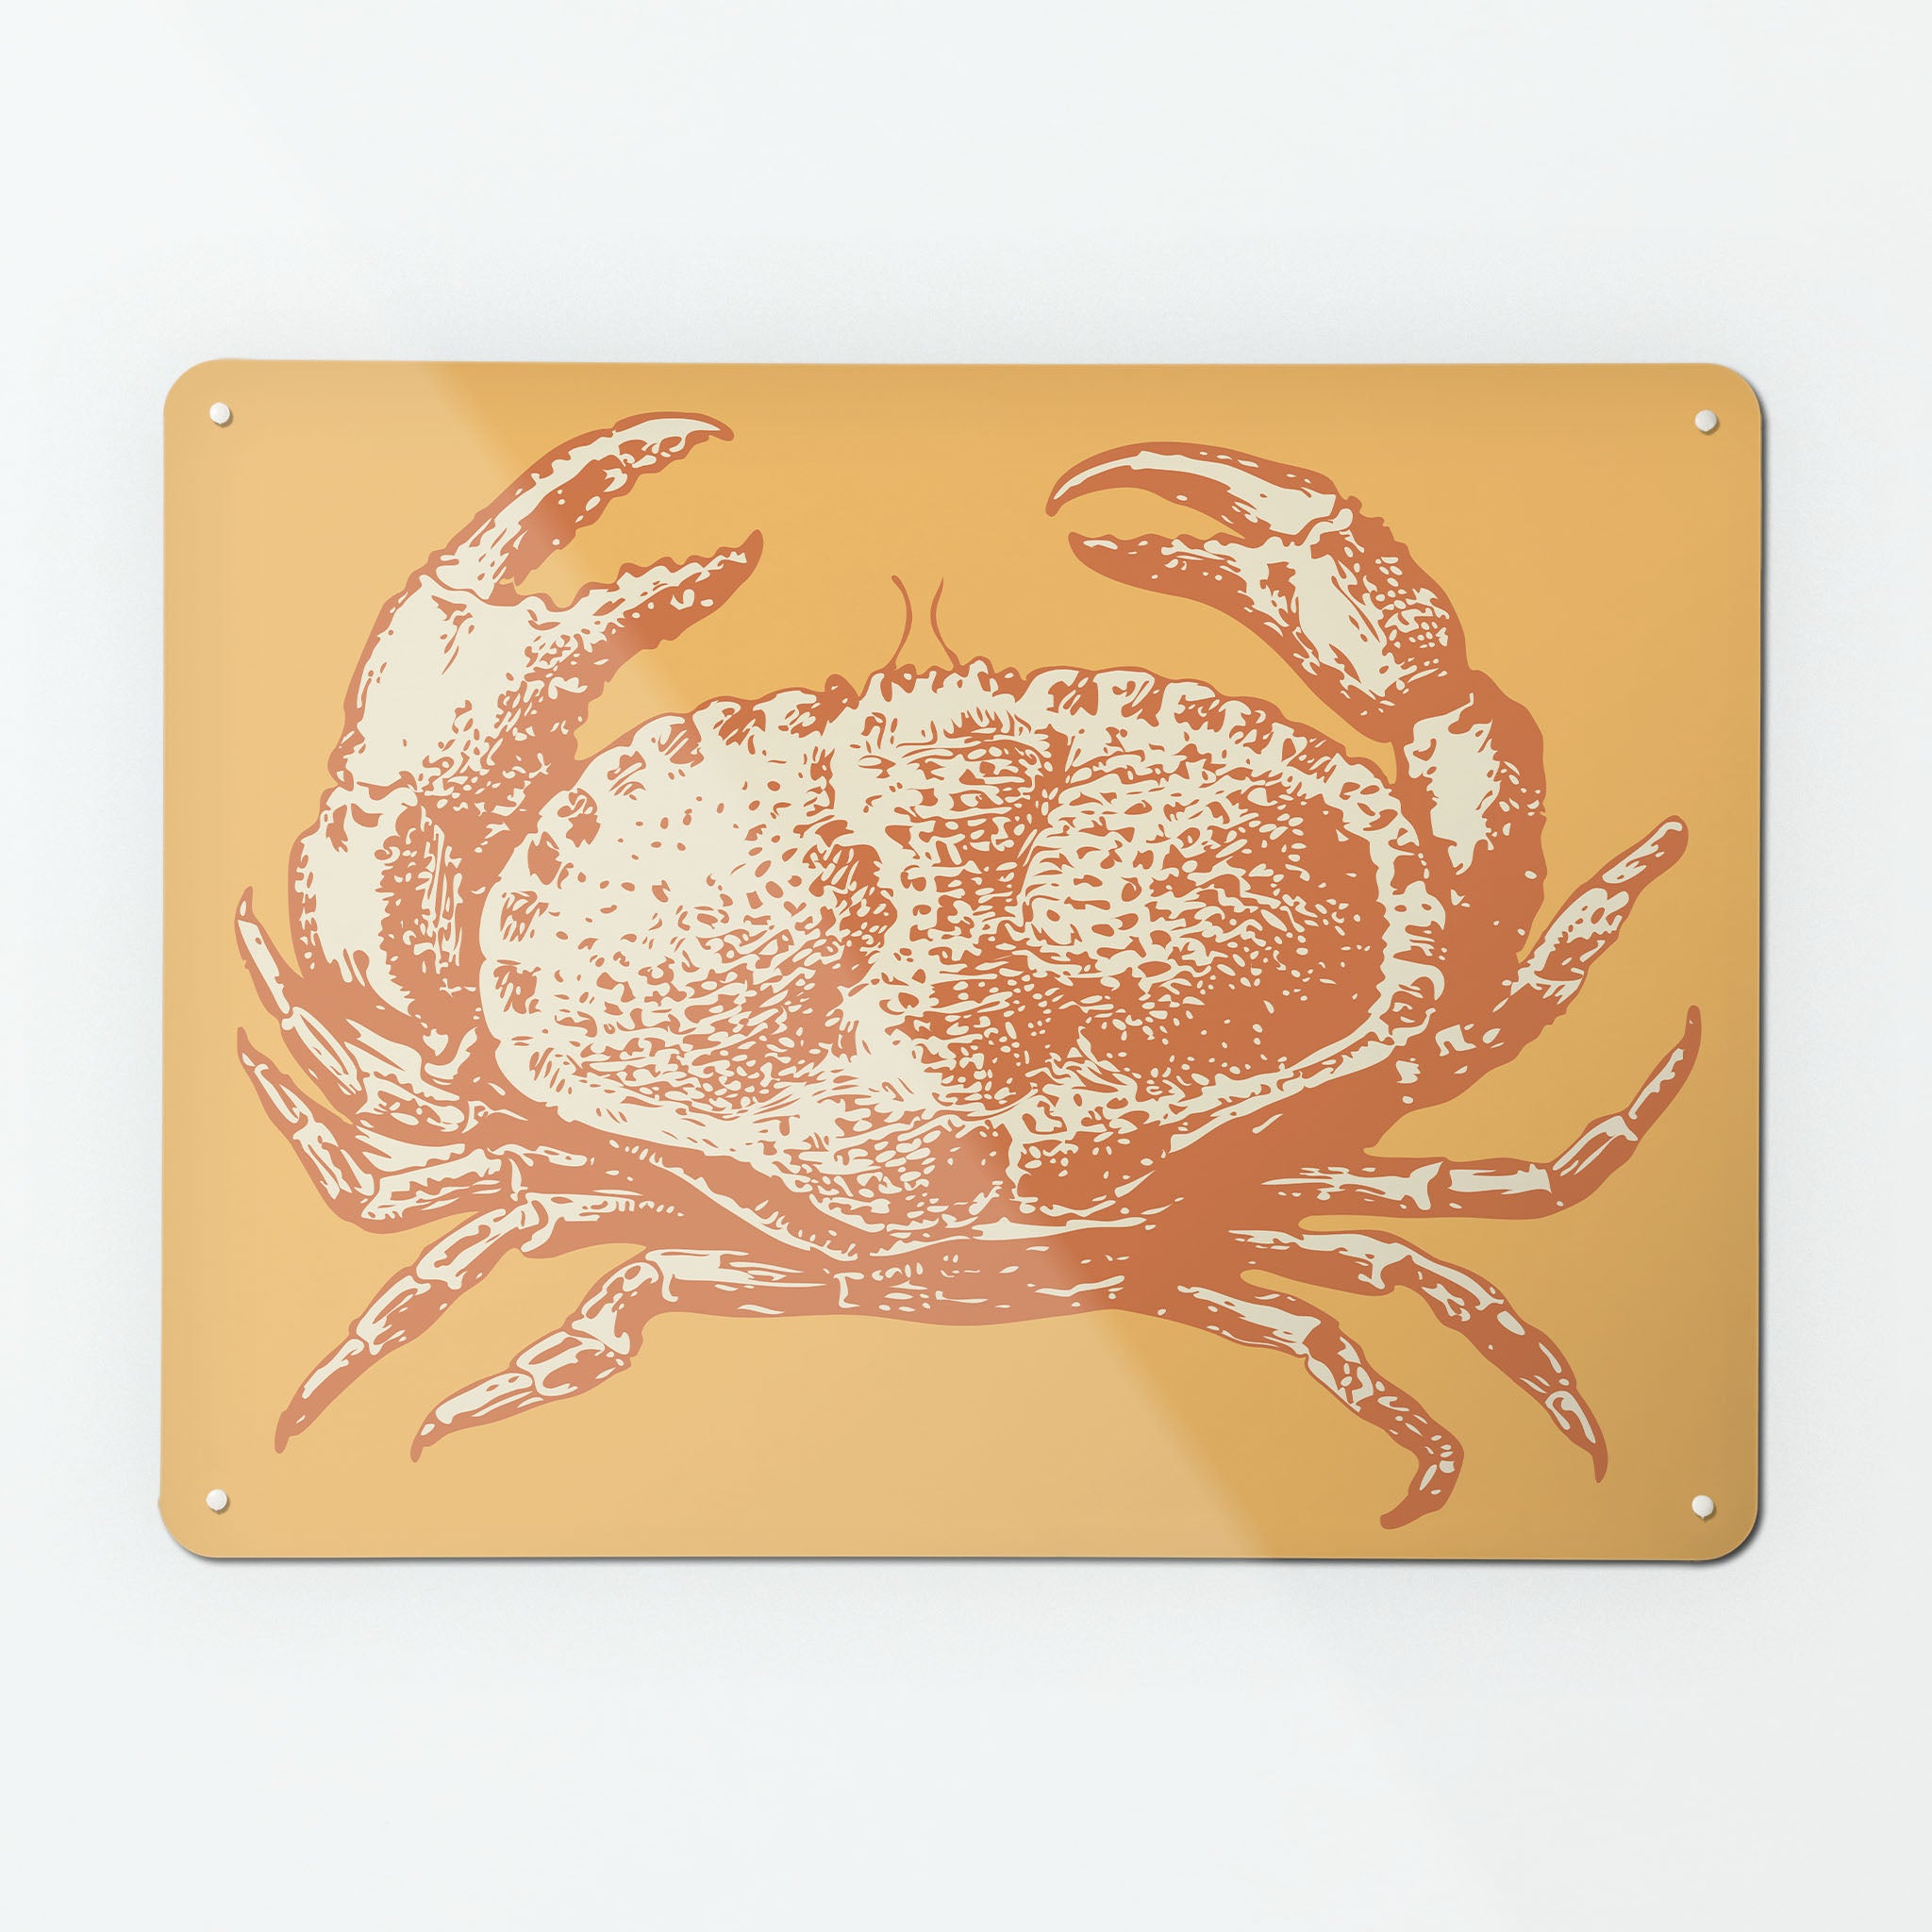 A large magnetic notice board by Beyond the Fridge with an image of a crab illustration on an orange background